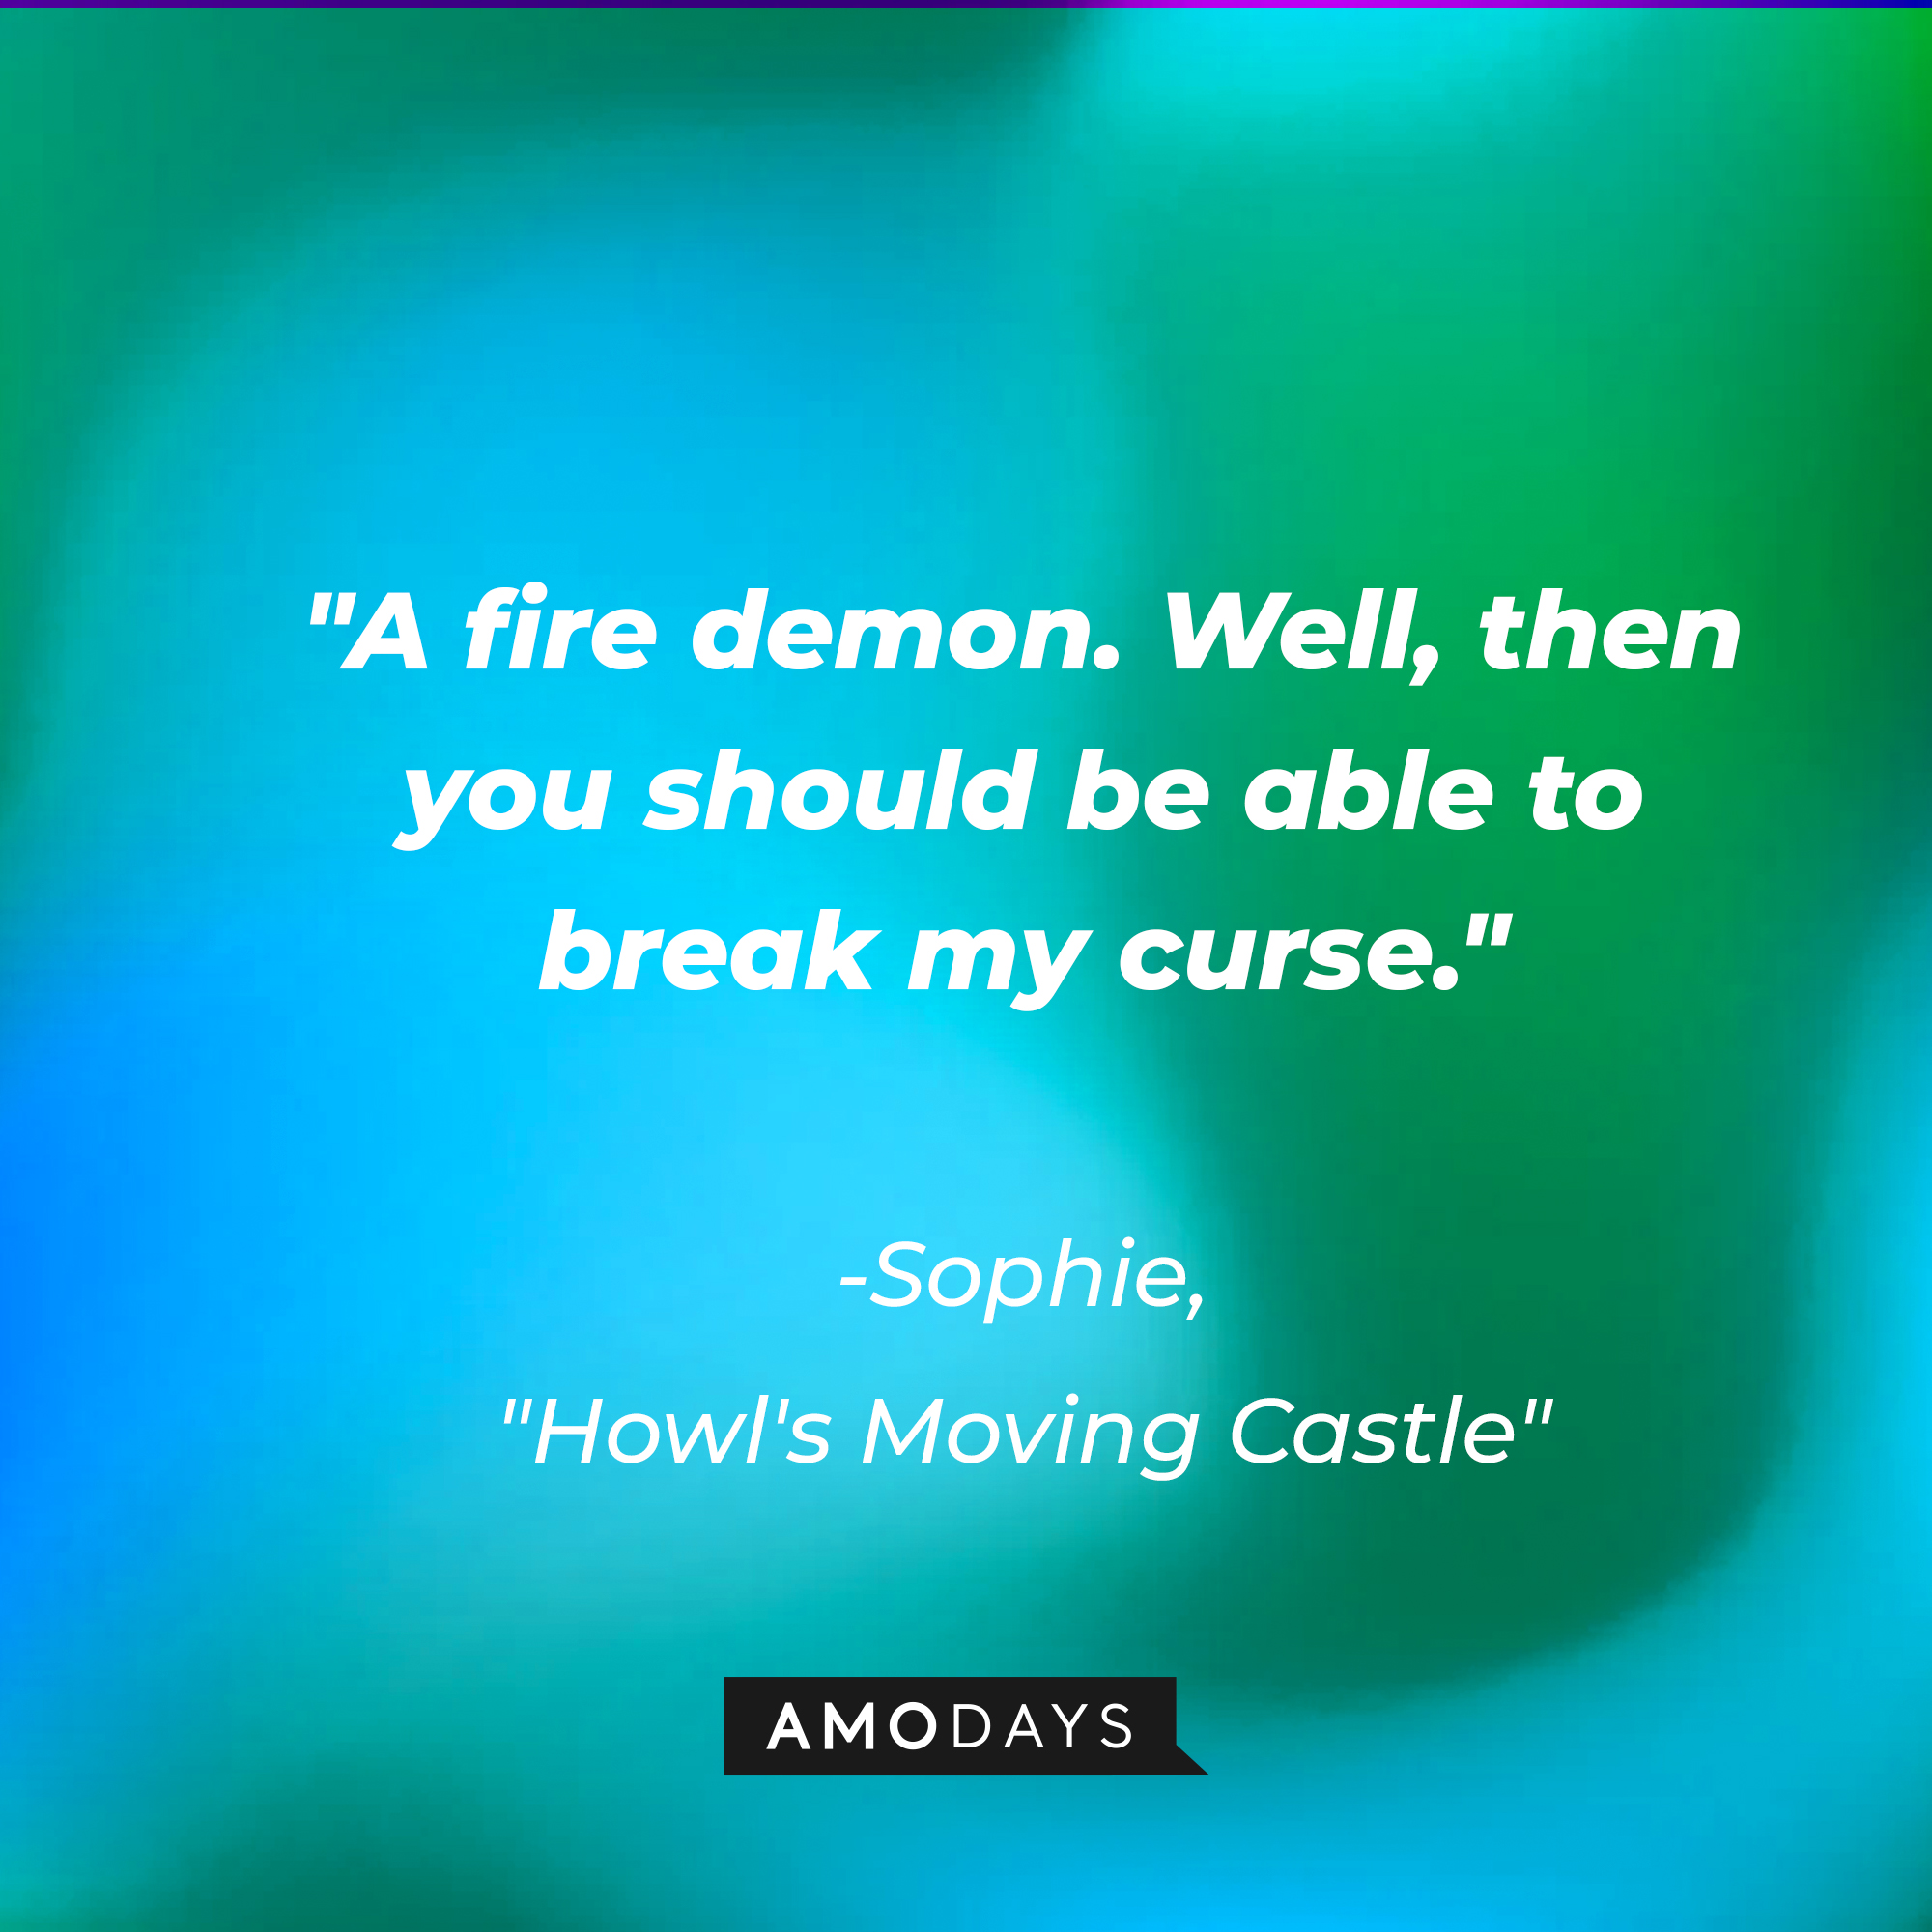 Sophie's quote in "Howl's Moving Castle:" "A fire demon. Well, then you should be able to break my curse." | Source: AmoDays